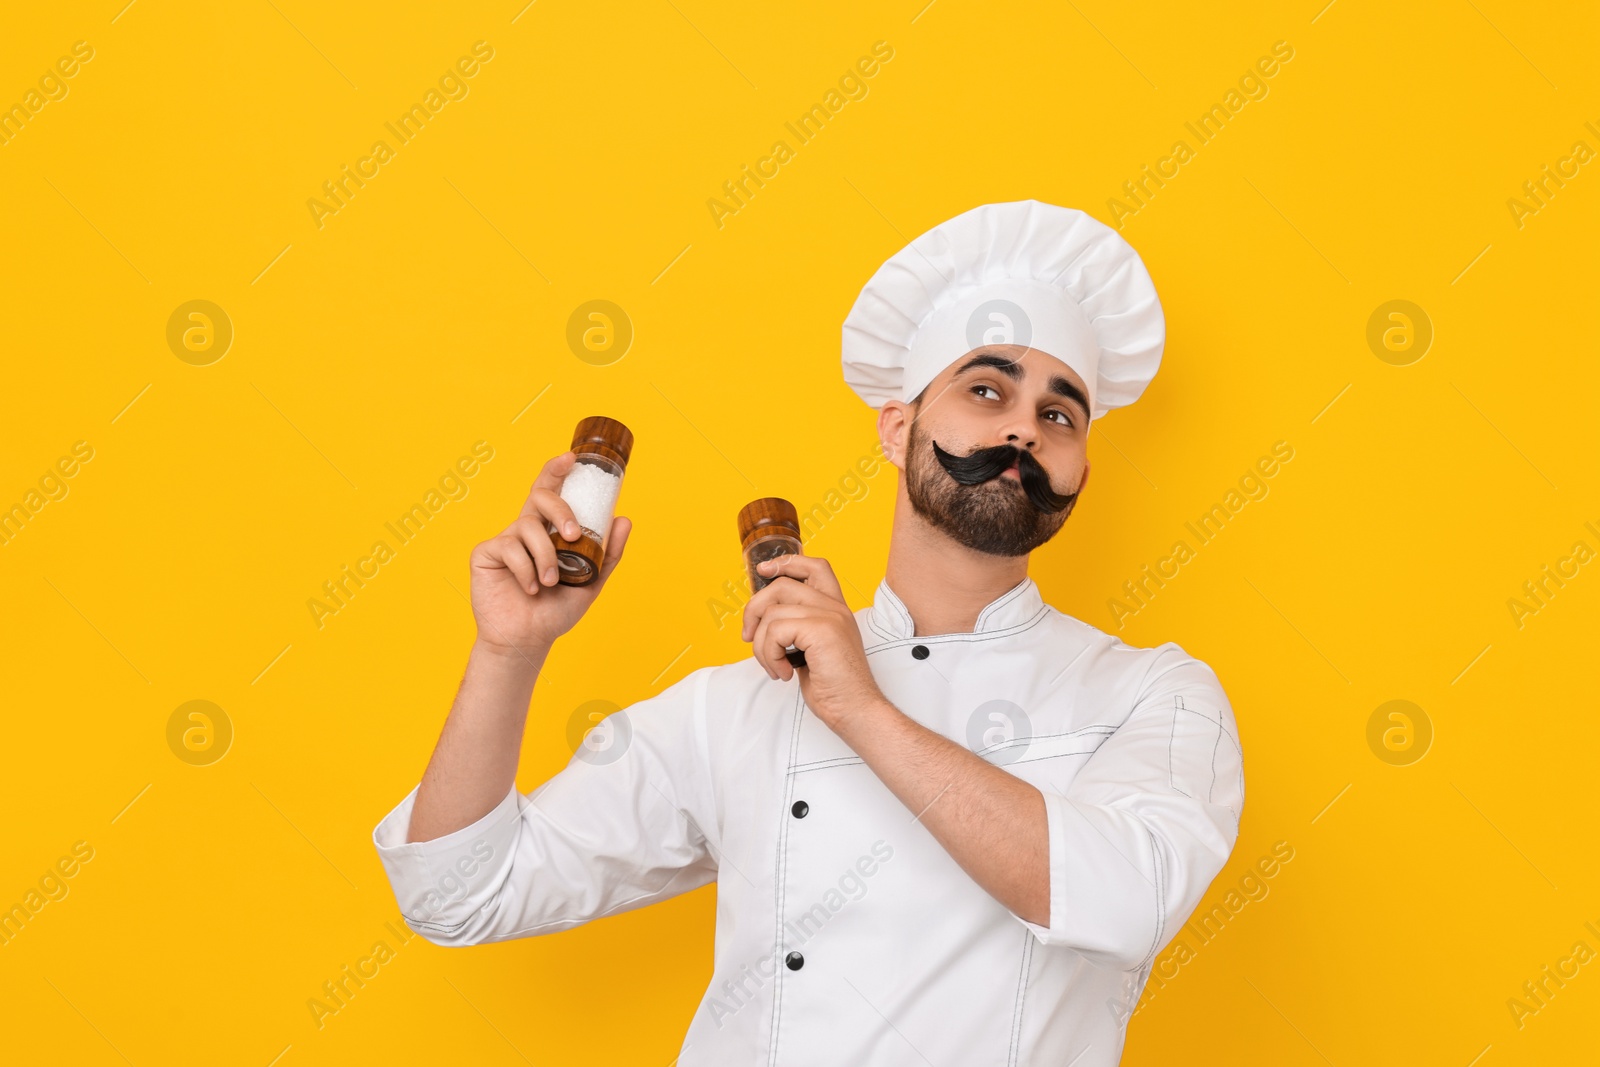 Photo of Professional chef with funny artificial moustache holding shakers on yellow background